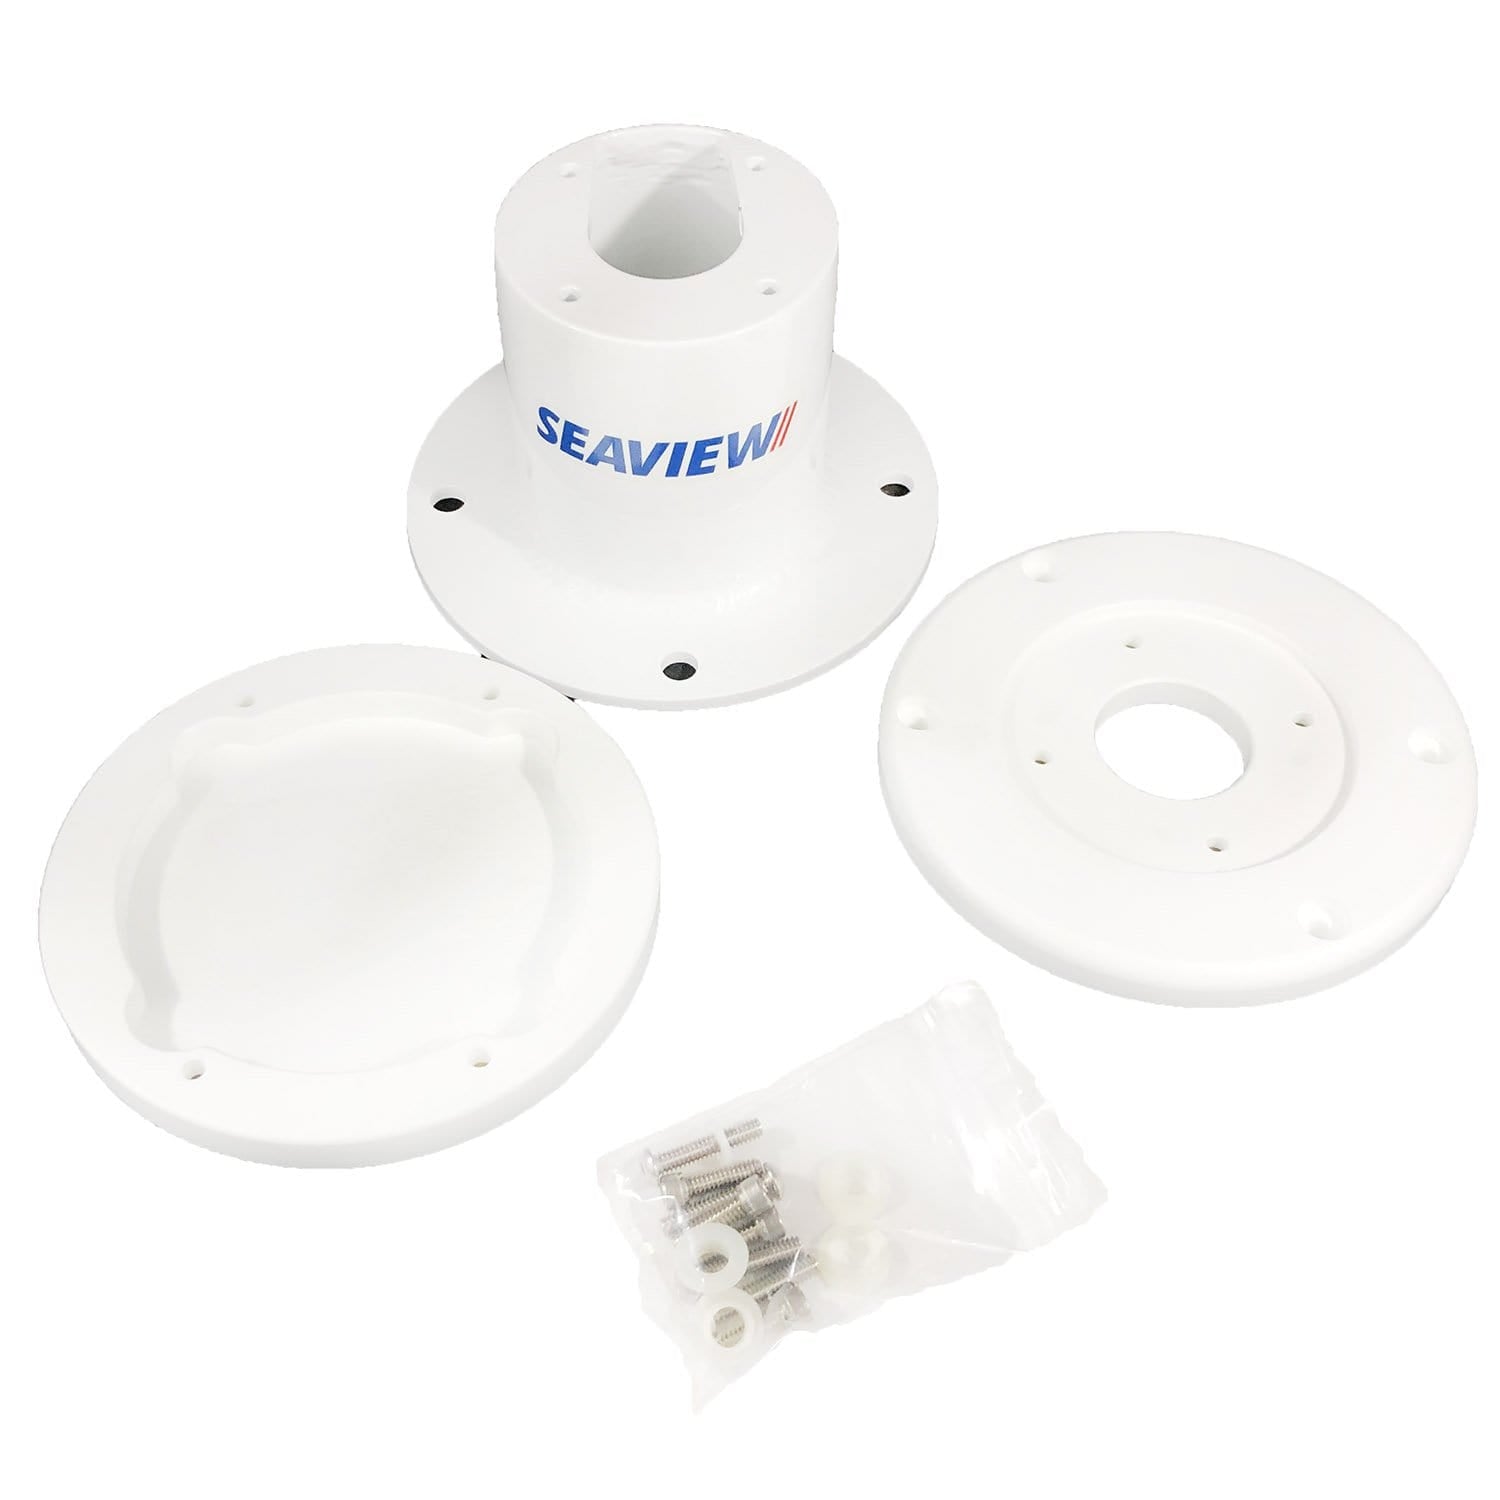 Seaview PM5SL8 6.38" Searchlight Mount / Vertical / 8 In. Round Base Plate